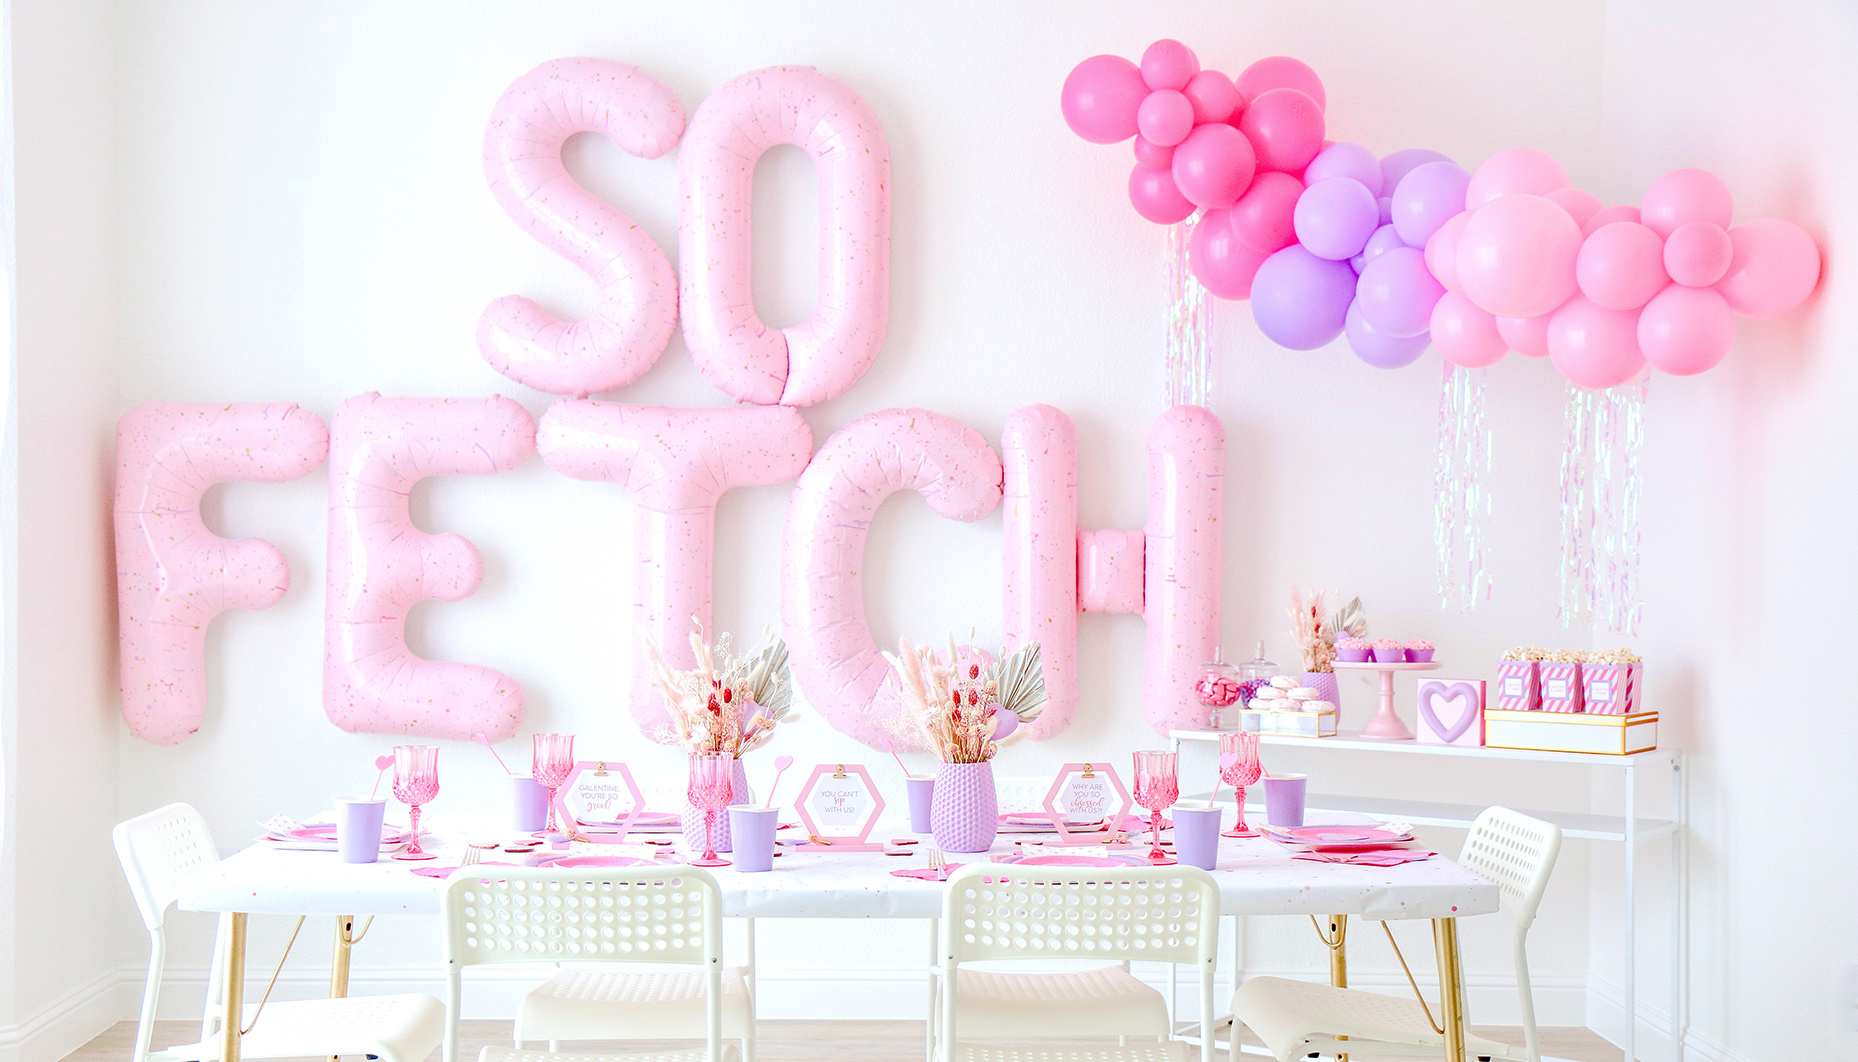 Mean Girls Themed Party Digital Download 